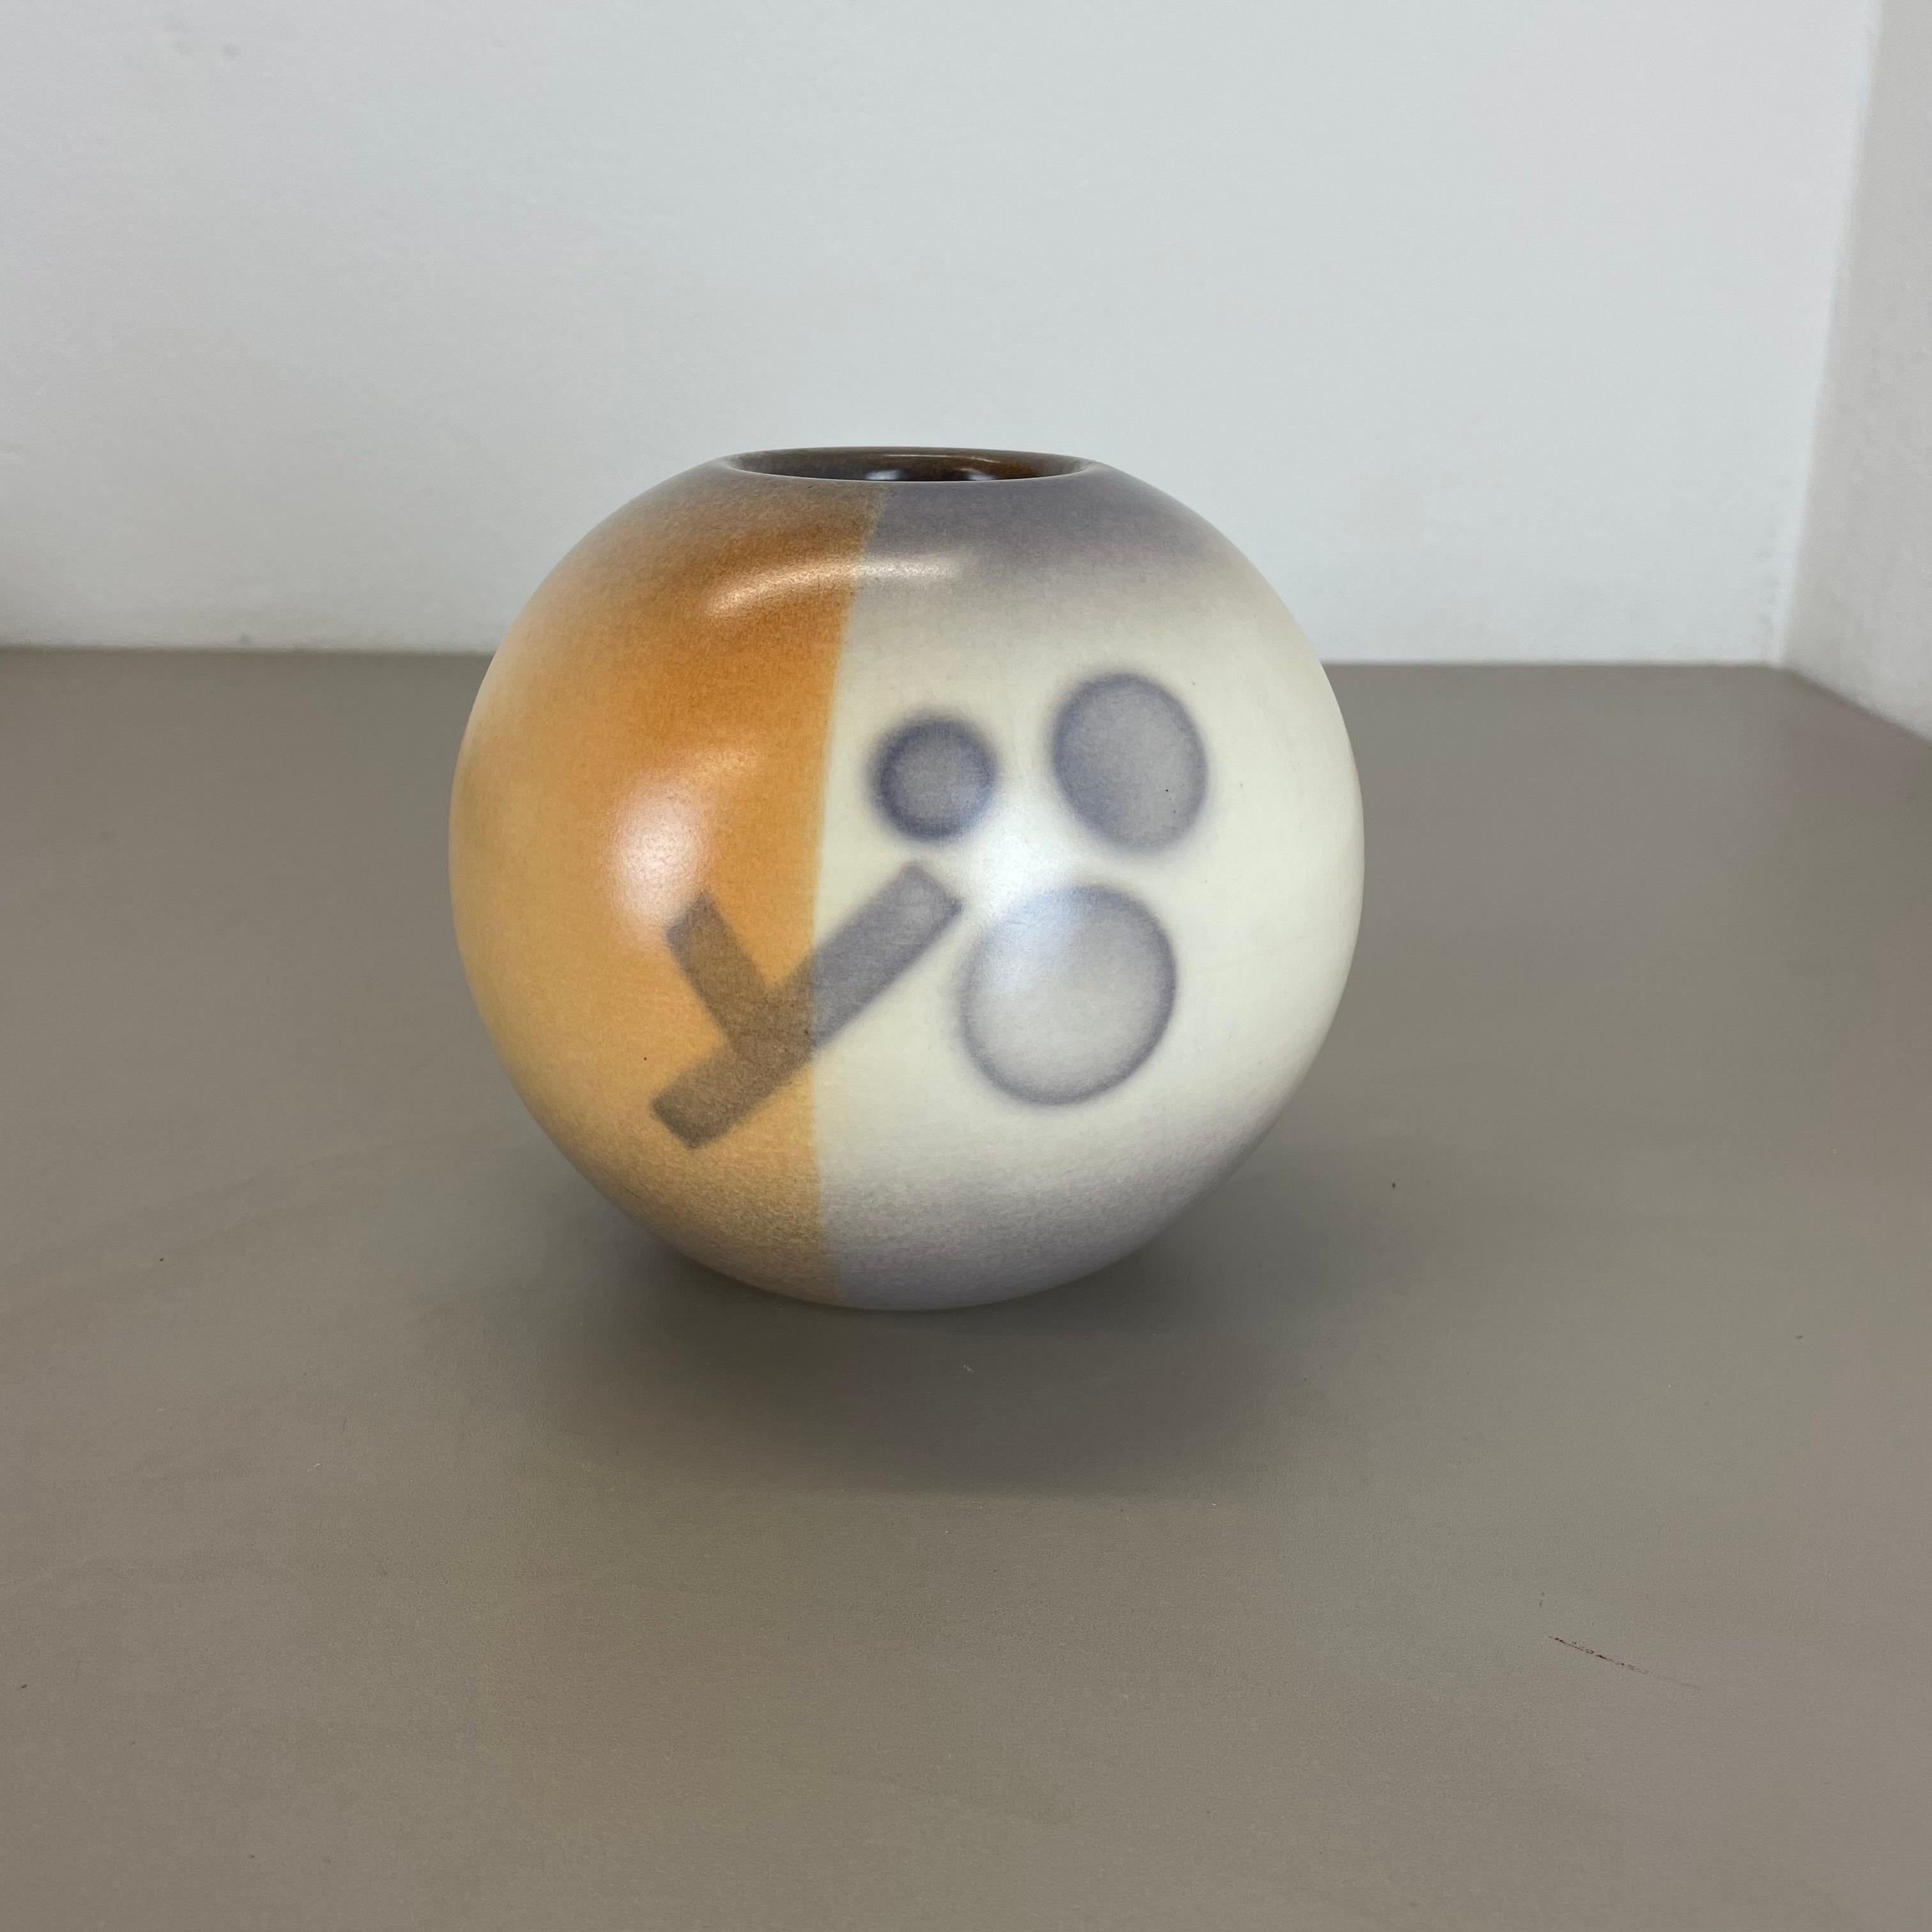 Article:

Pottery ceramic vase


Producer:

Karlsruher Majolika, Germany


Decade:

1950s





Original vintage 1950s pottery ceramic vase in Germany. High quality German production with a nice strong colored coloration. The vase was designed and